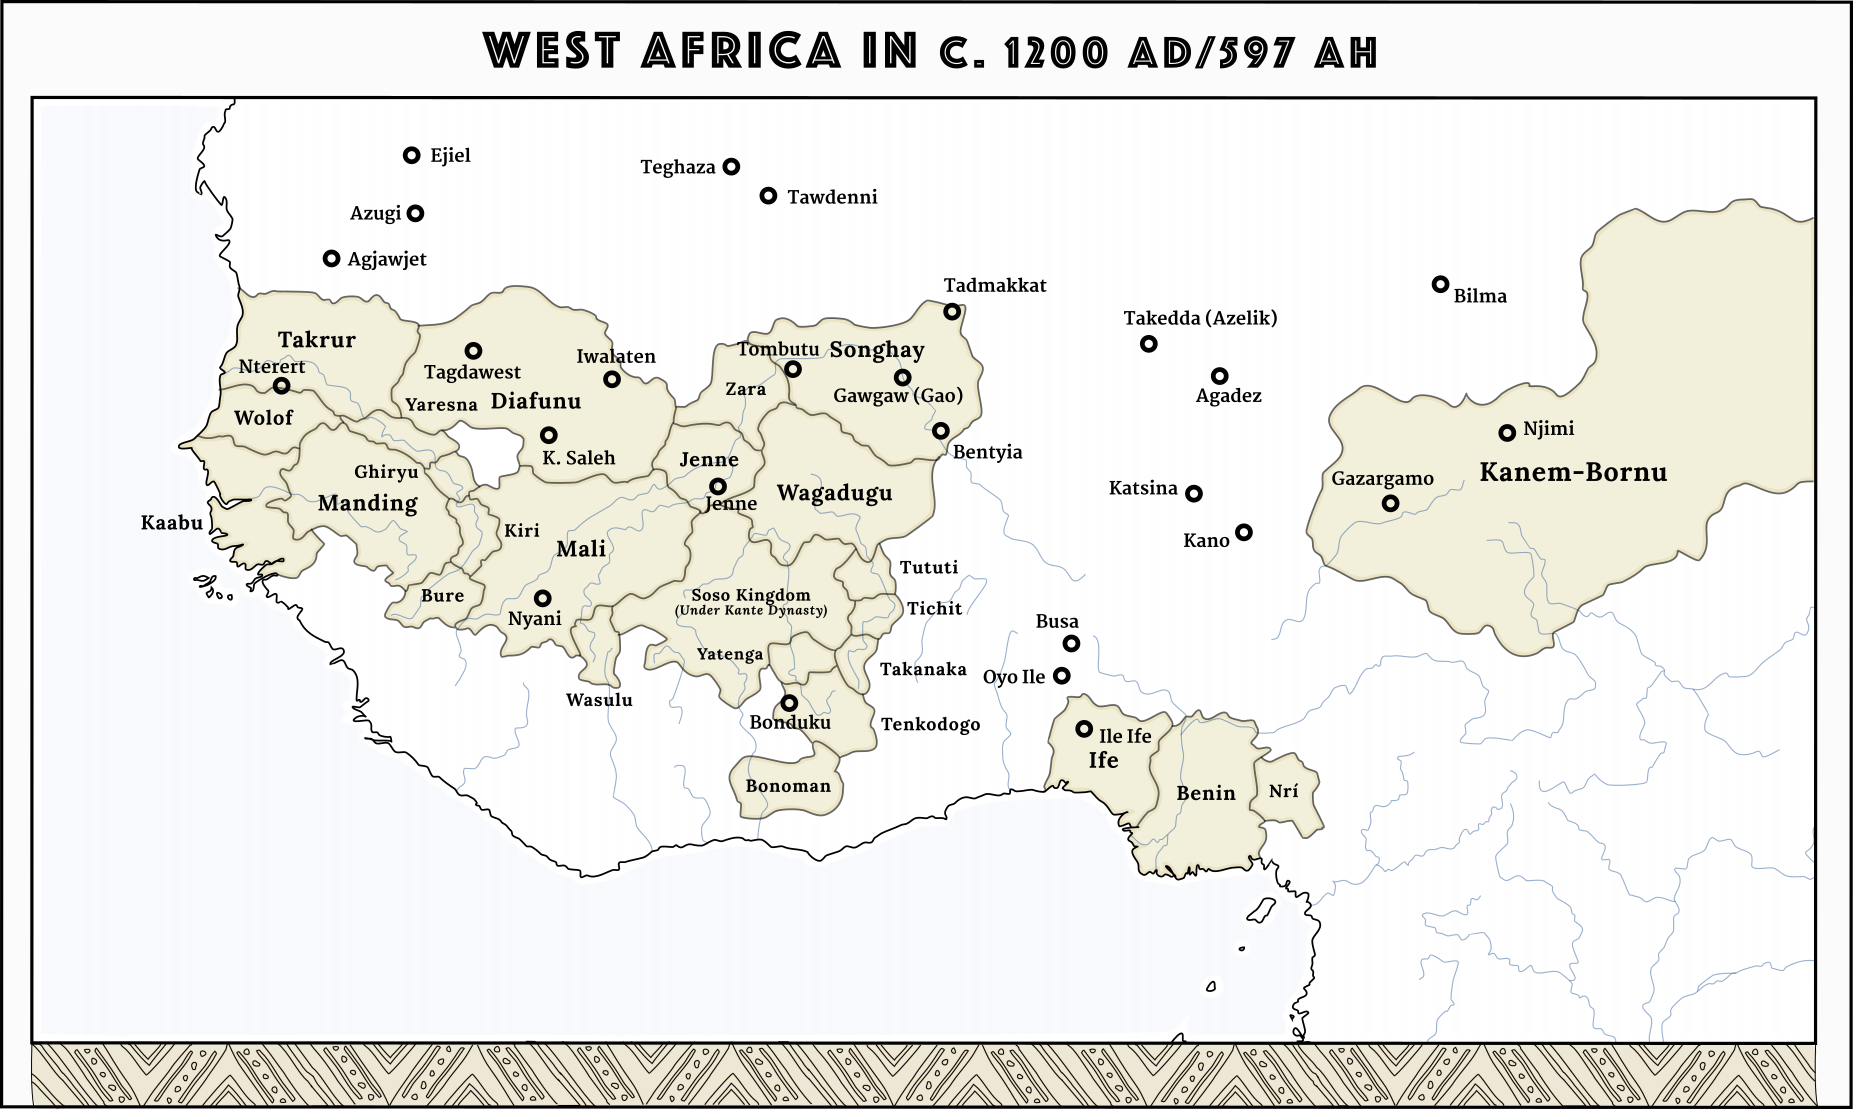 west_africa_in_1200_ce_by_upvoteanthology-dae5q46.png